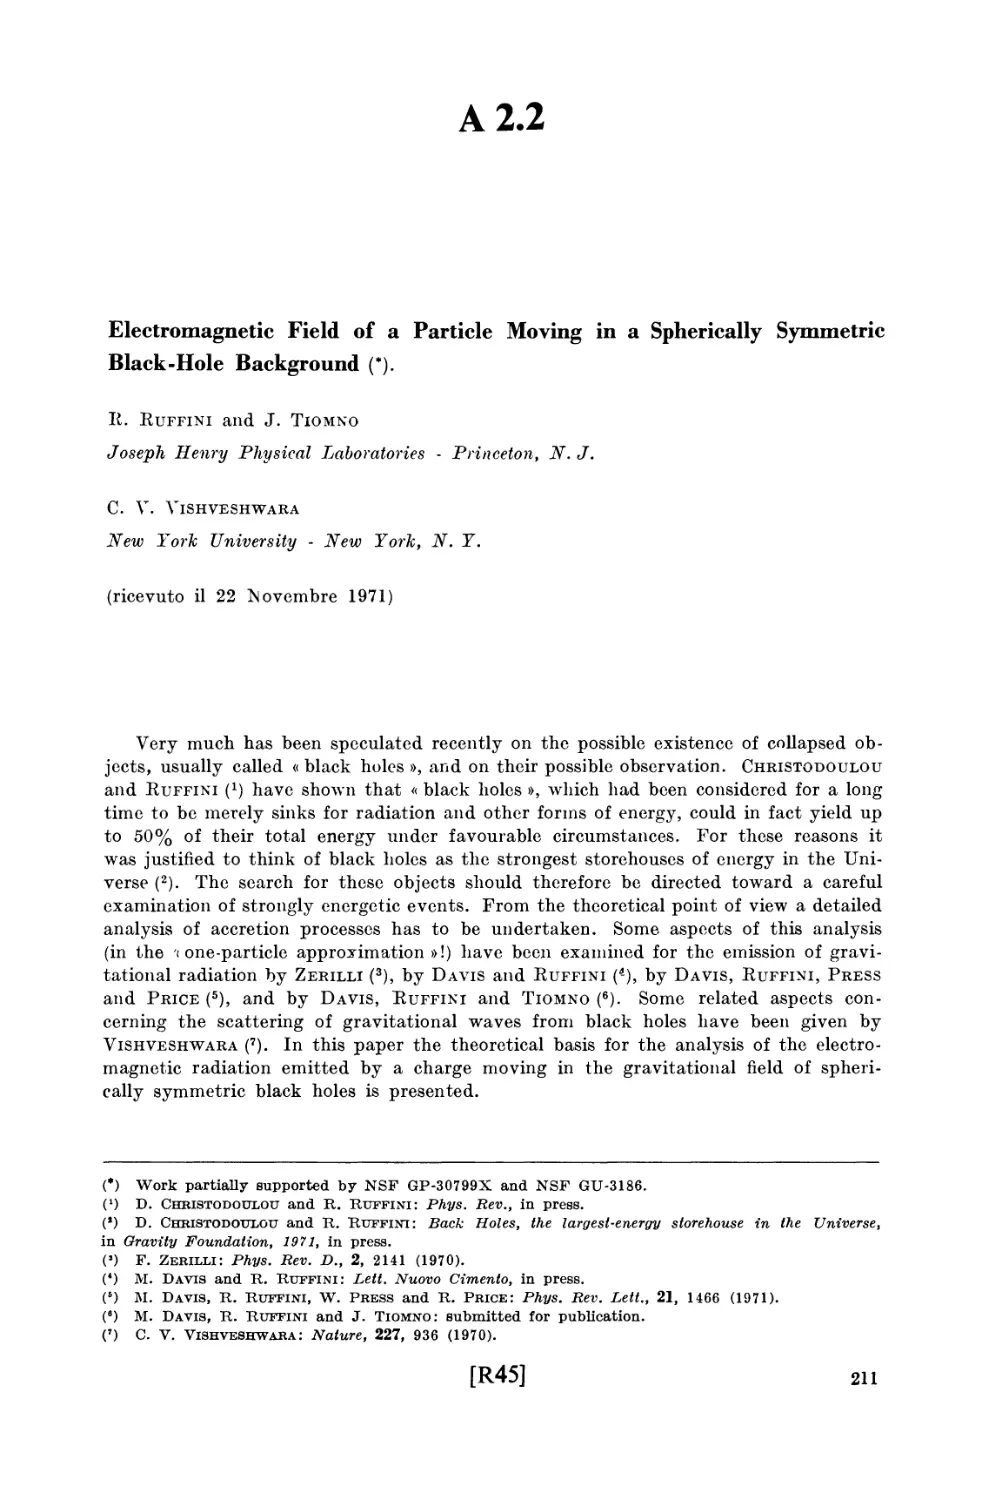 Appendix 2.2 Electromagnetic Field of a Particle Moving in a Spherically Symmetric Black-Hole Background / R. Ruffini, J. Tiomno and C. Vishveshwara